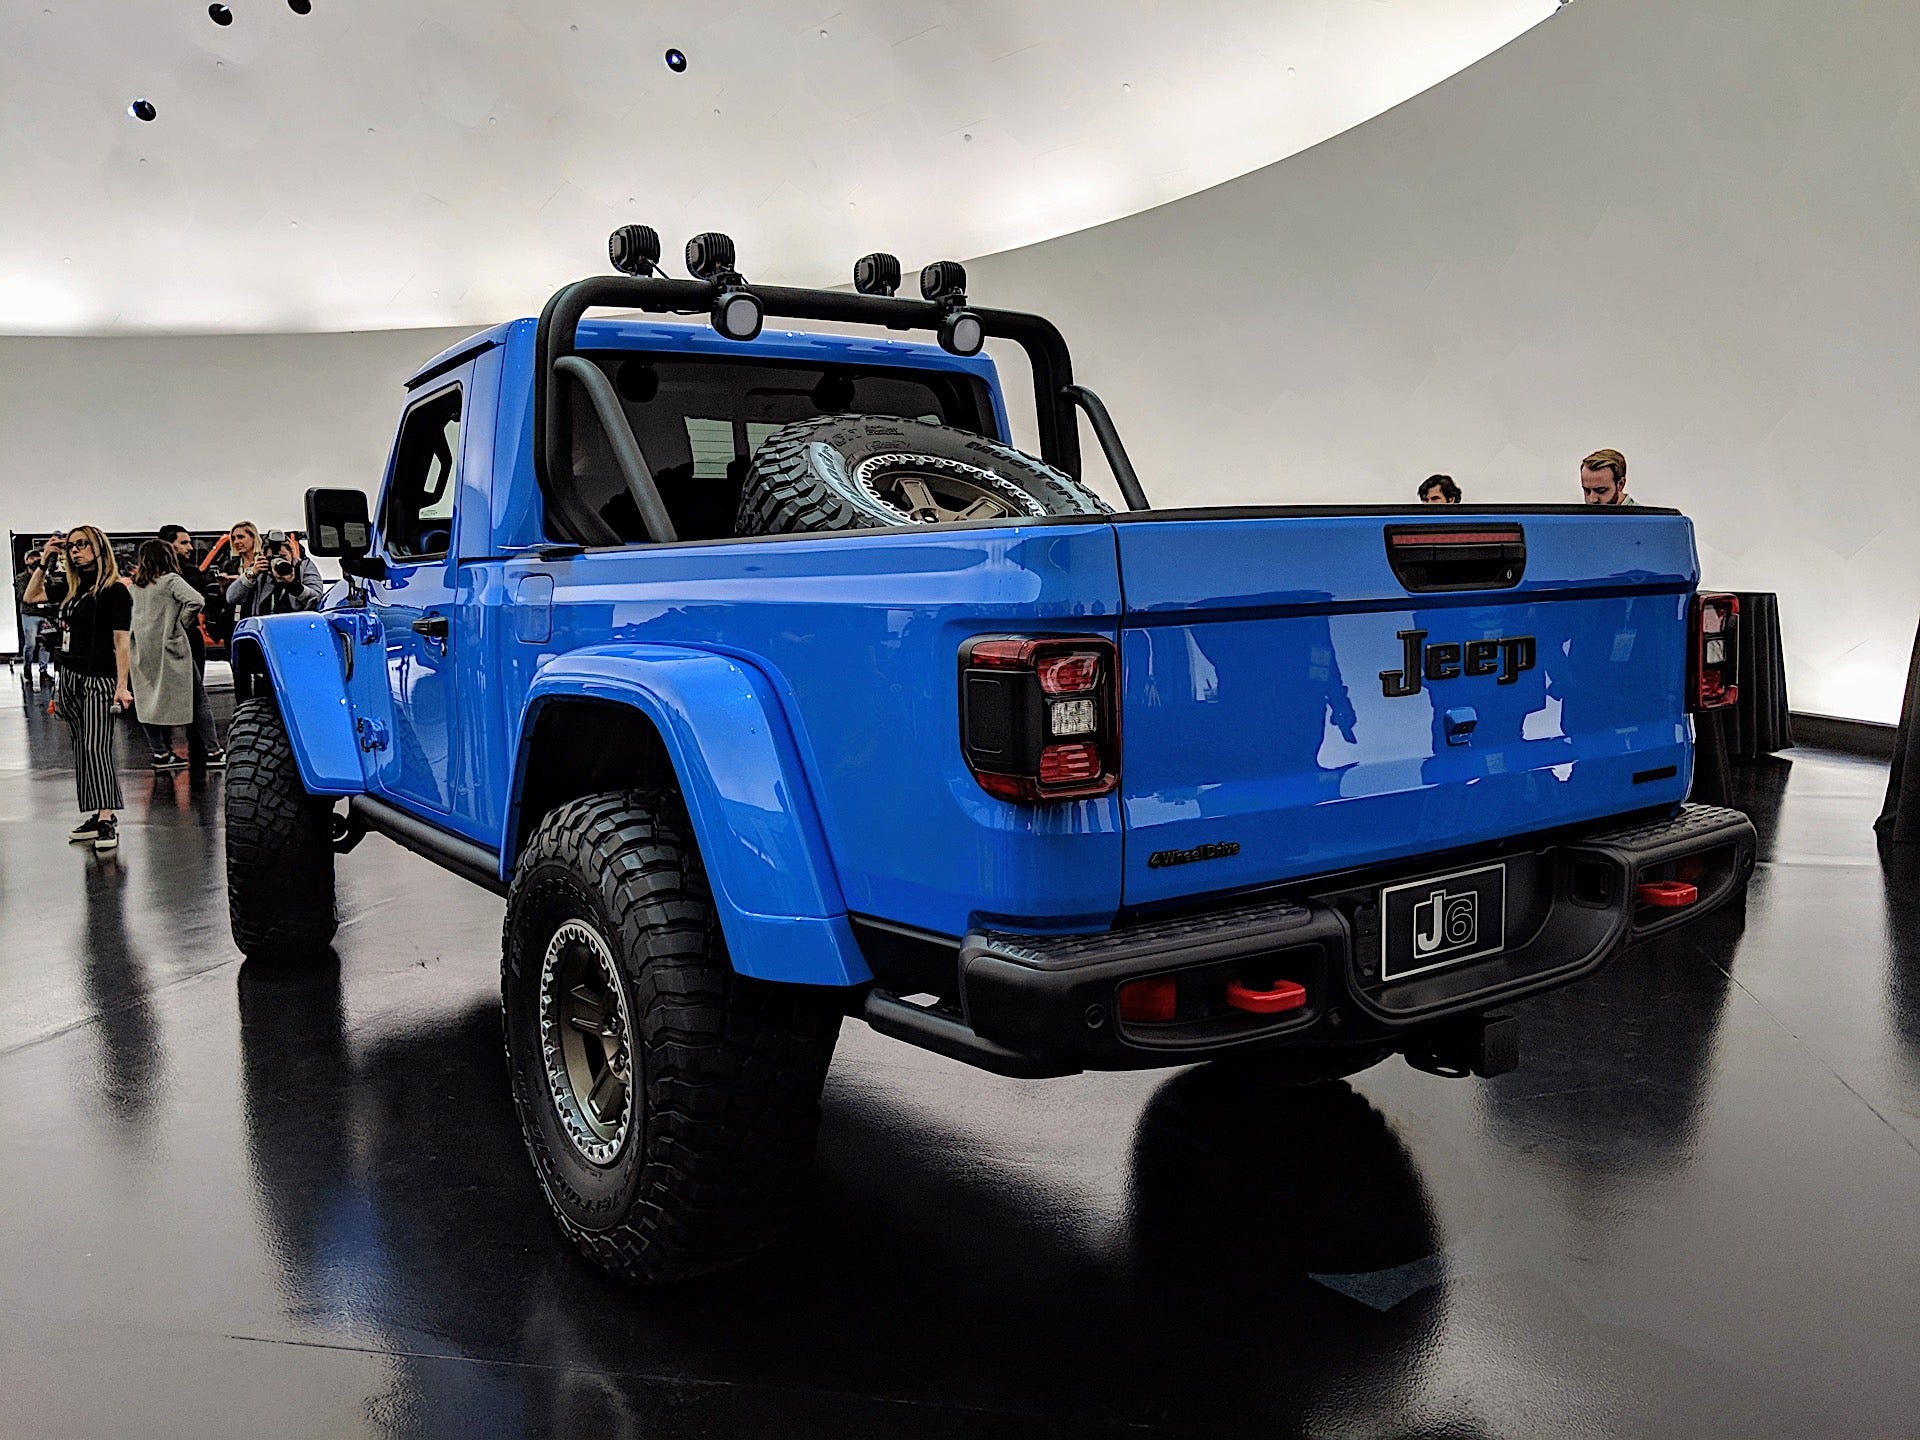 A Two-Door Jeep Gladiator Pickup Truck Won't Be Happening Anytime Soon